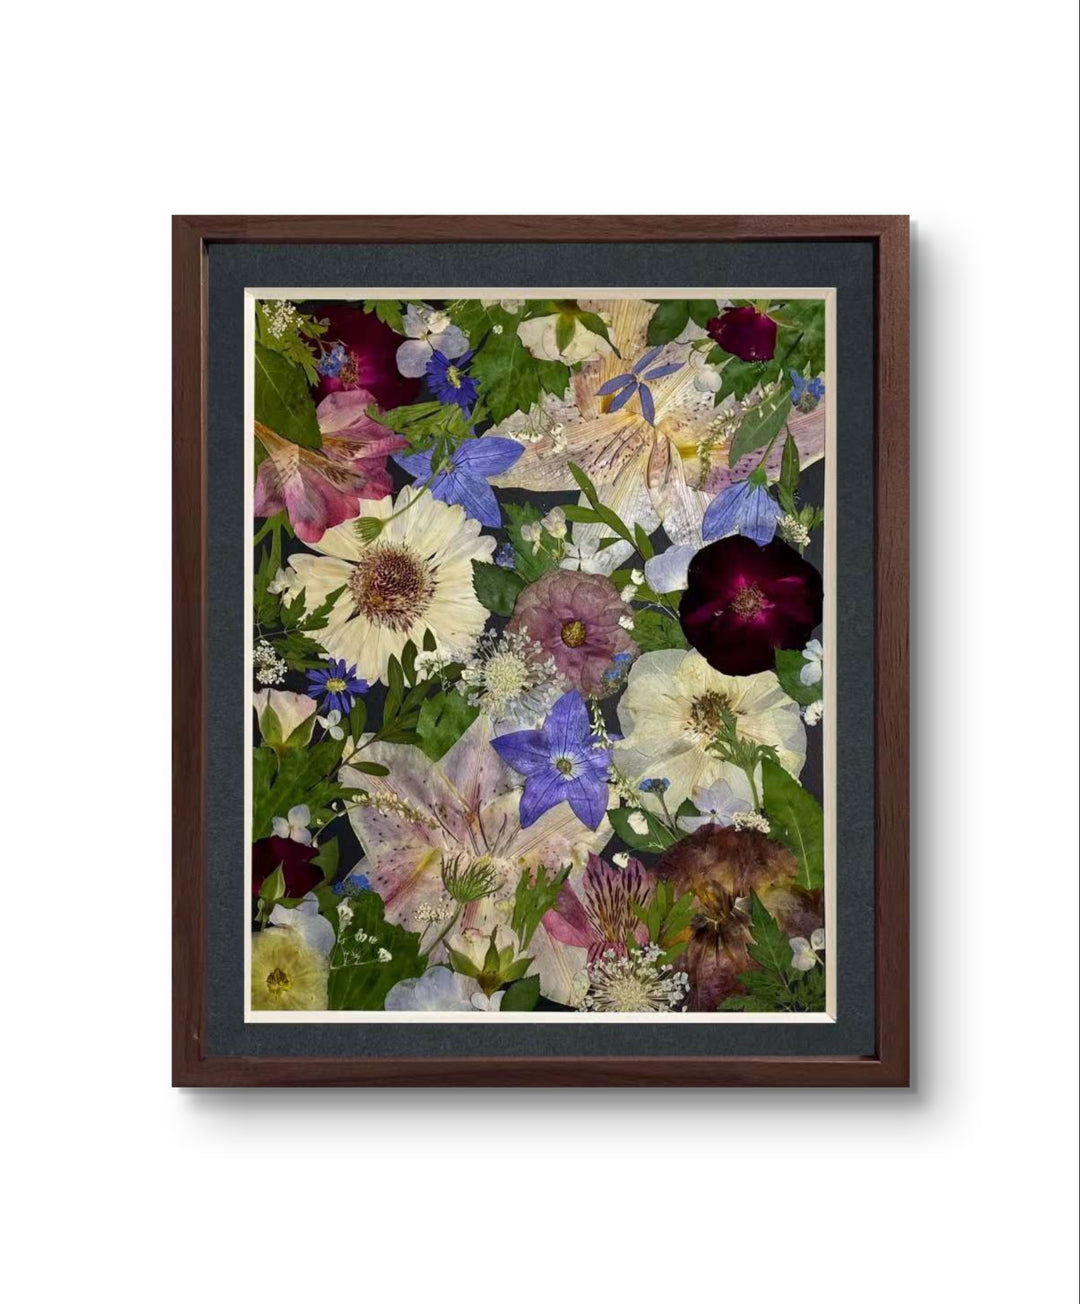 Sparkle stars theme 11 inches width 12.5 inches height pressed flower frame art.